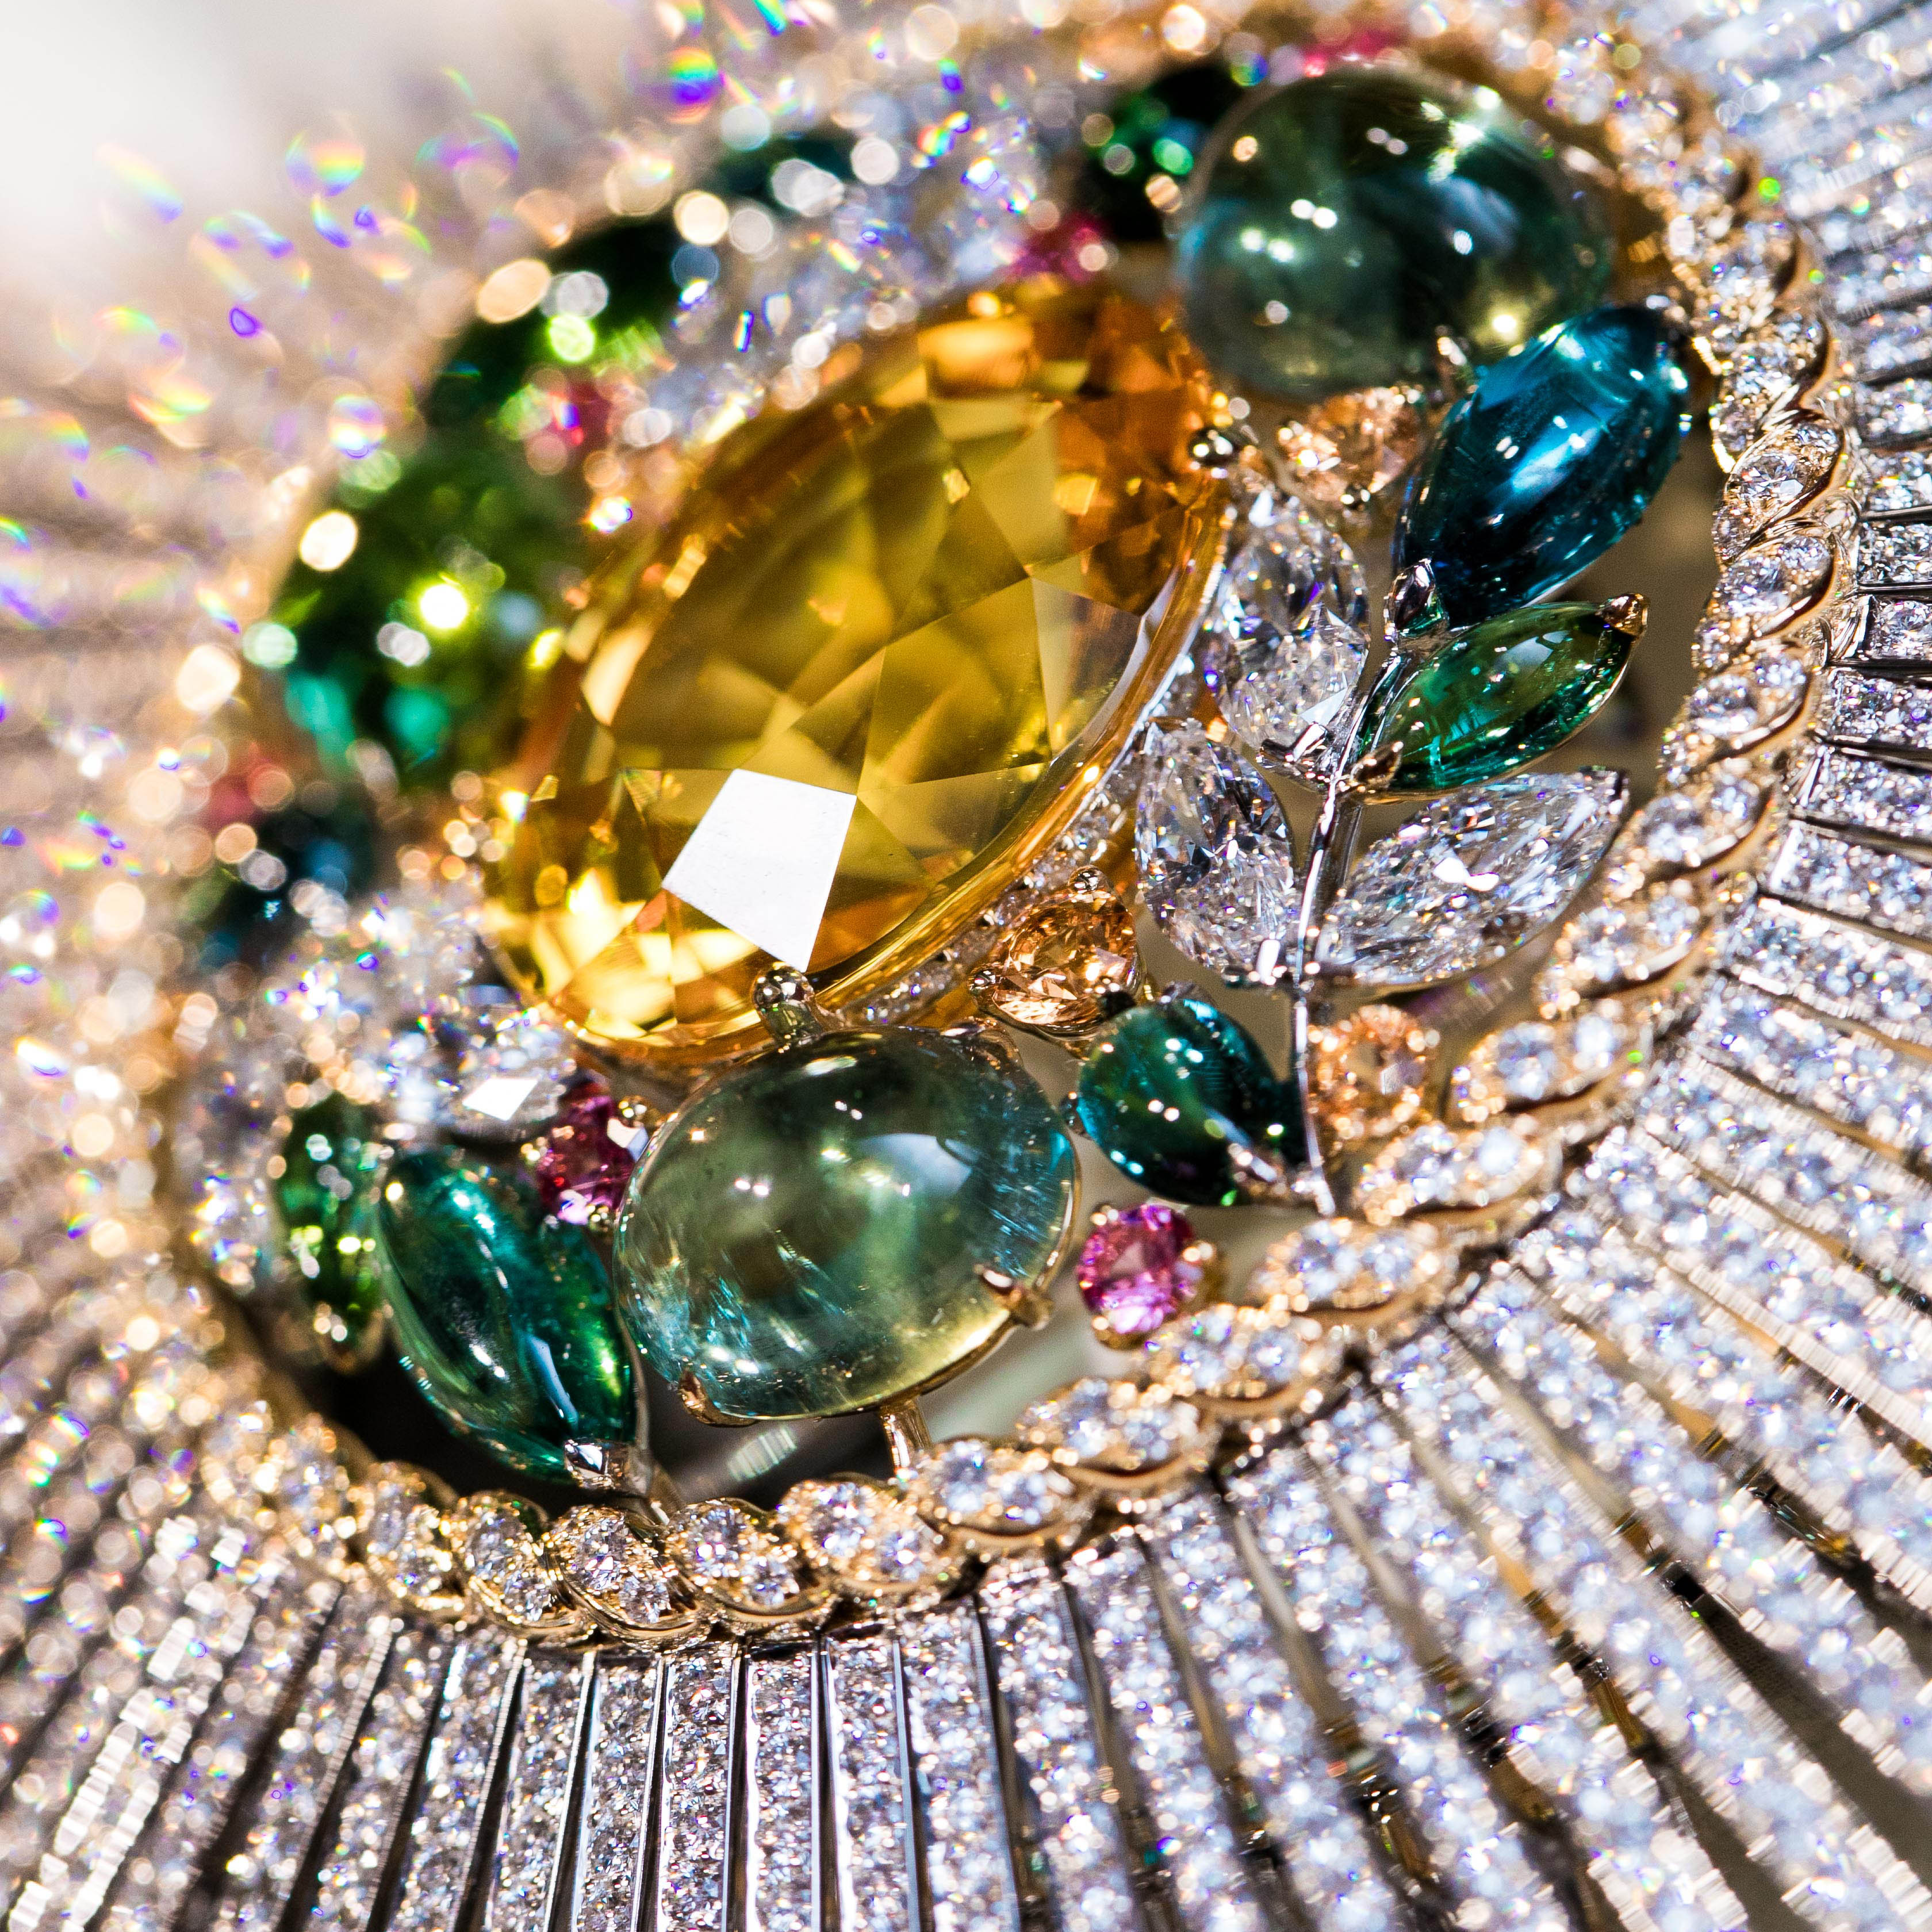 Chanel Fine Jewelry Released 'Over the Moon' Short Film